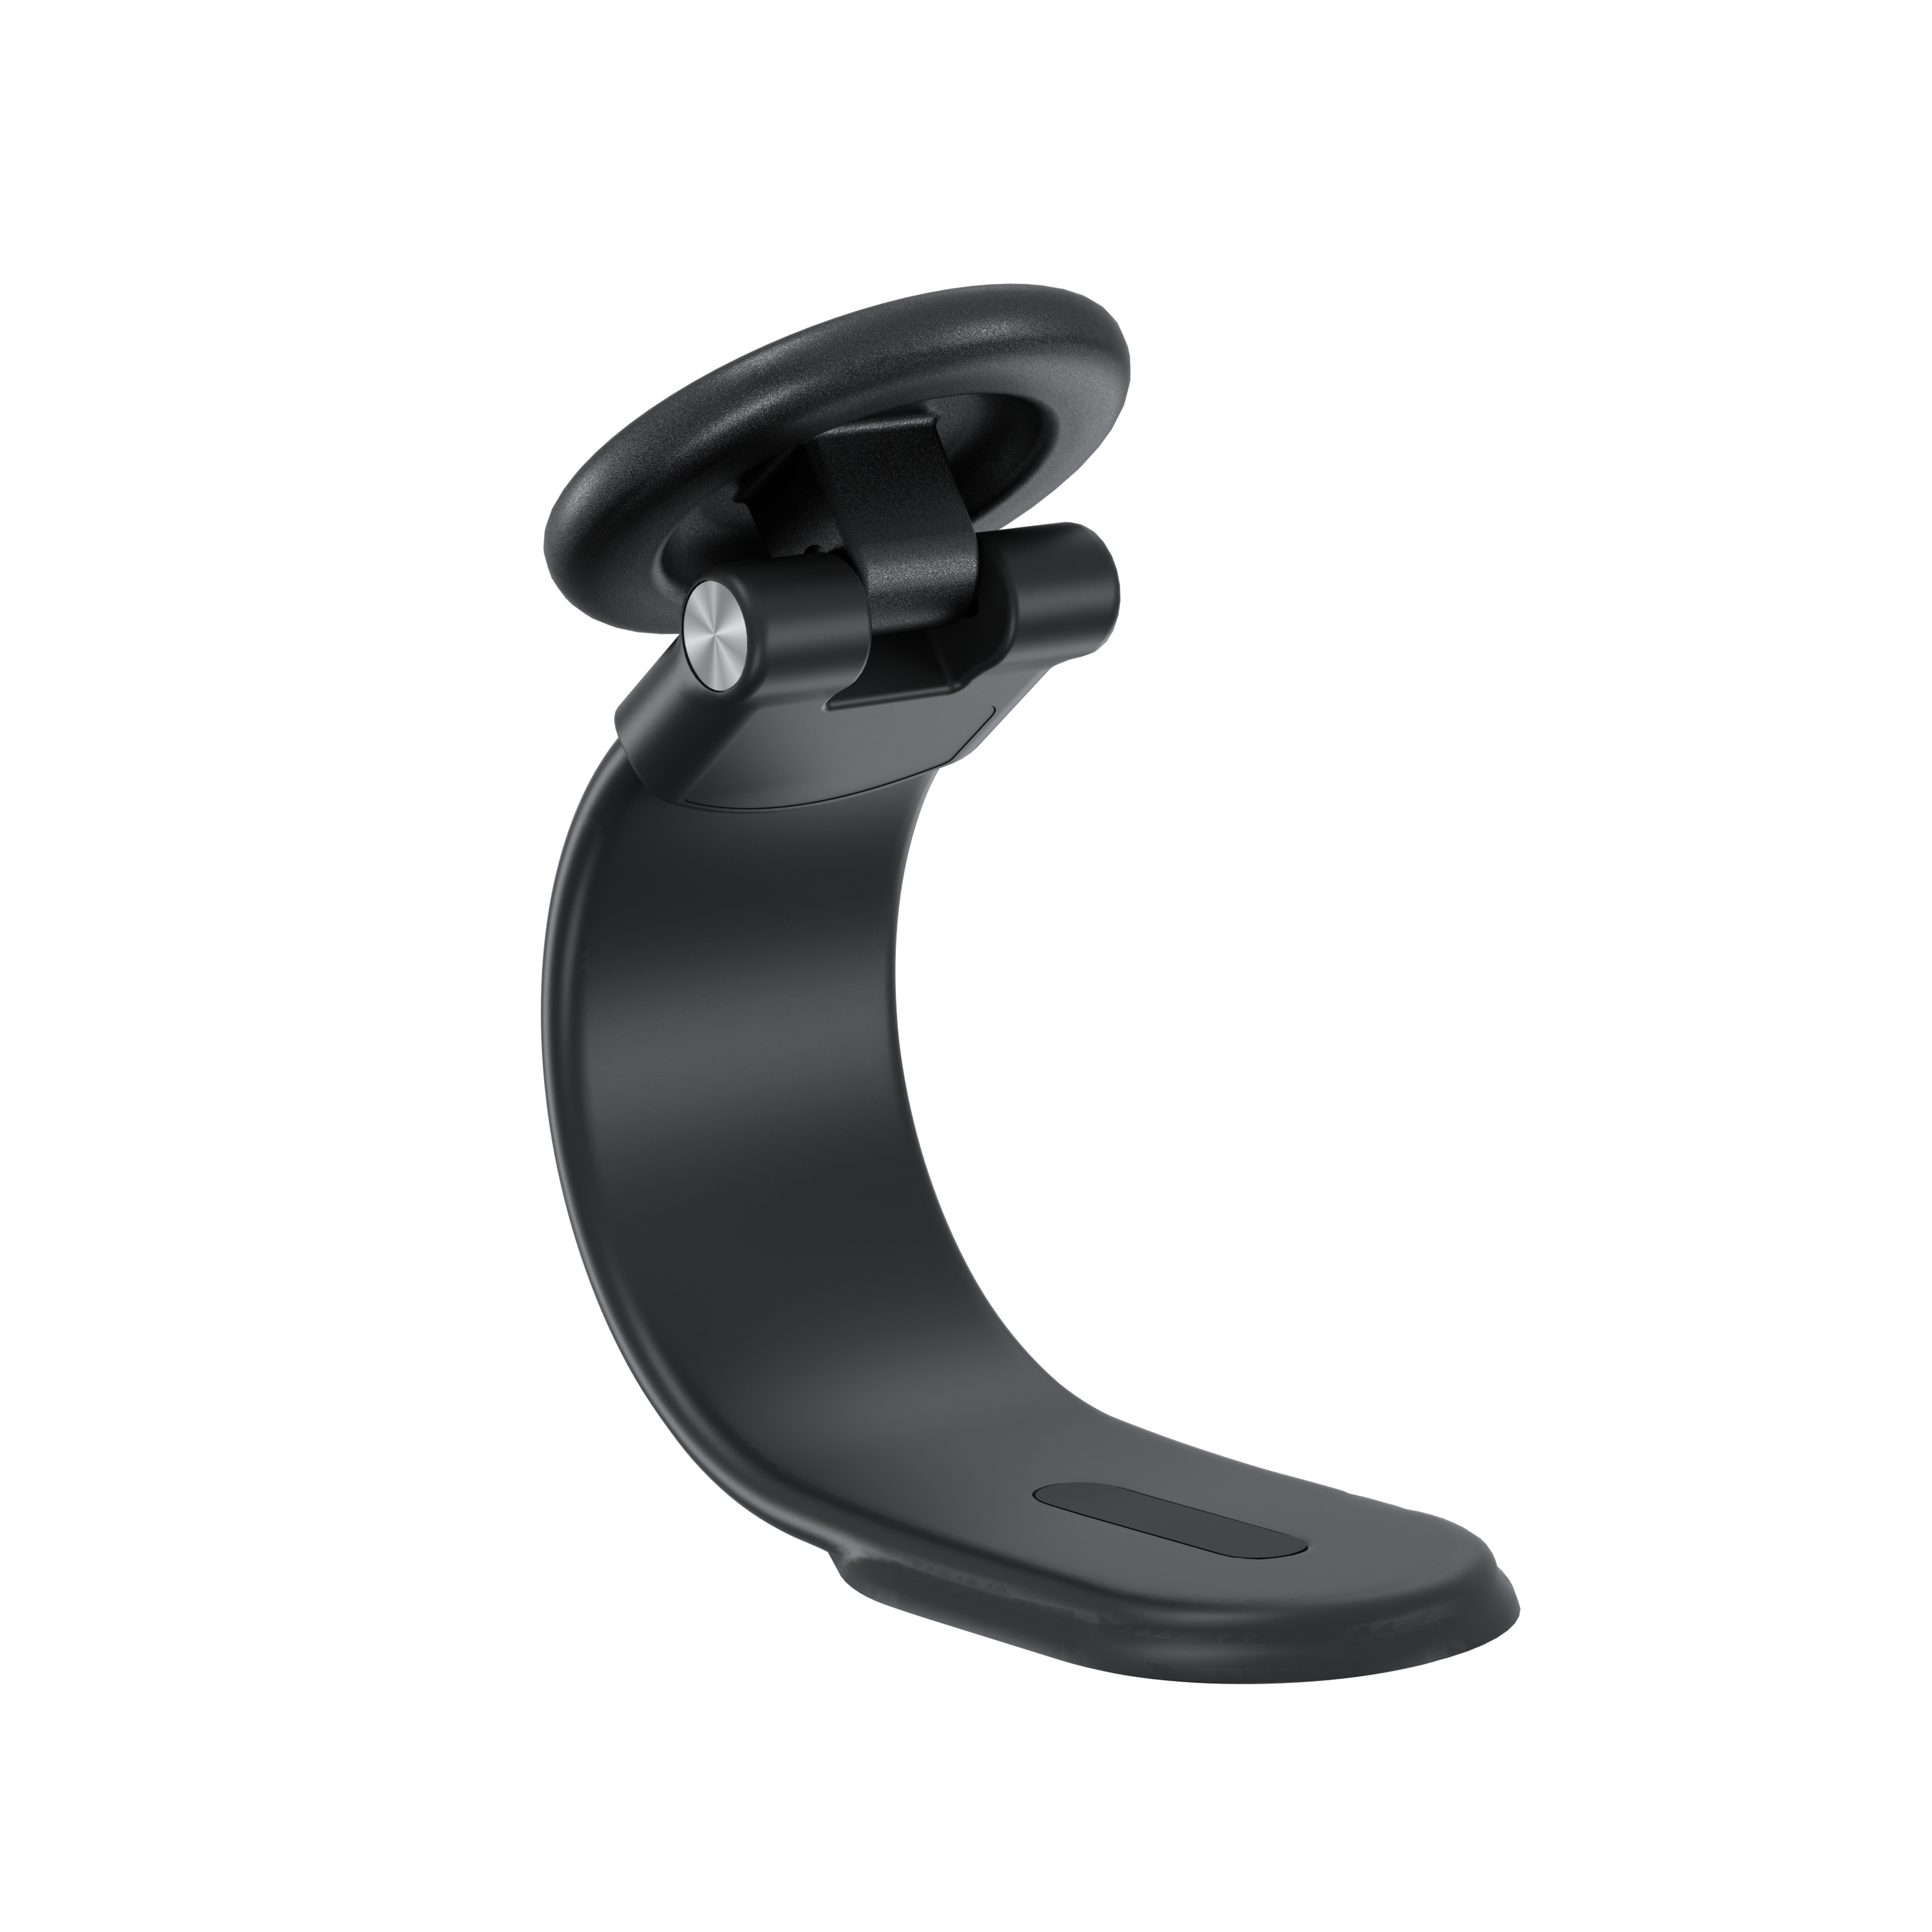 Elegant and minimalist design of the MagClap FlipEZ Car Mount, compatible with a wide range of smartphones for a secure, stylish charging experience.